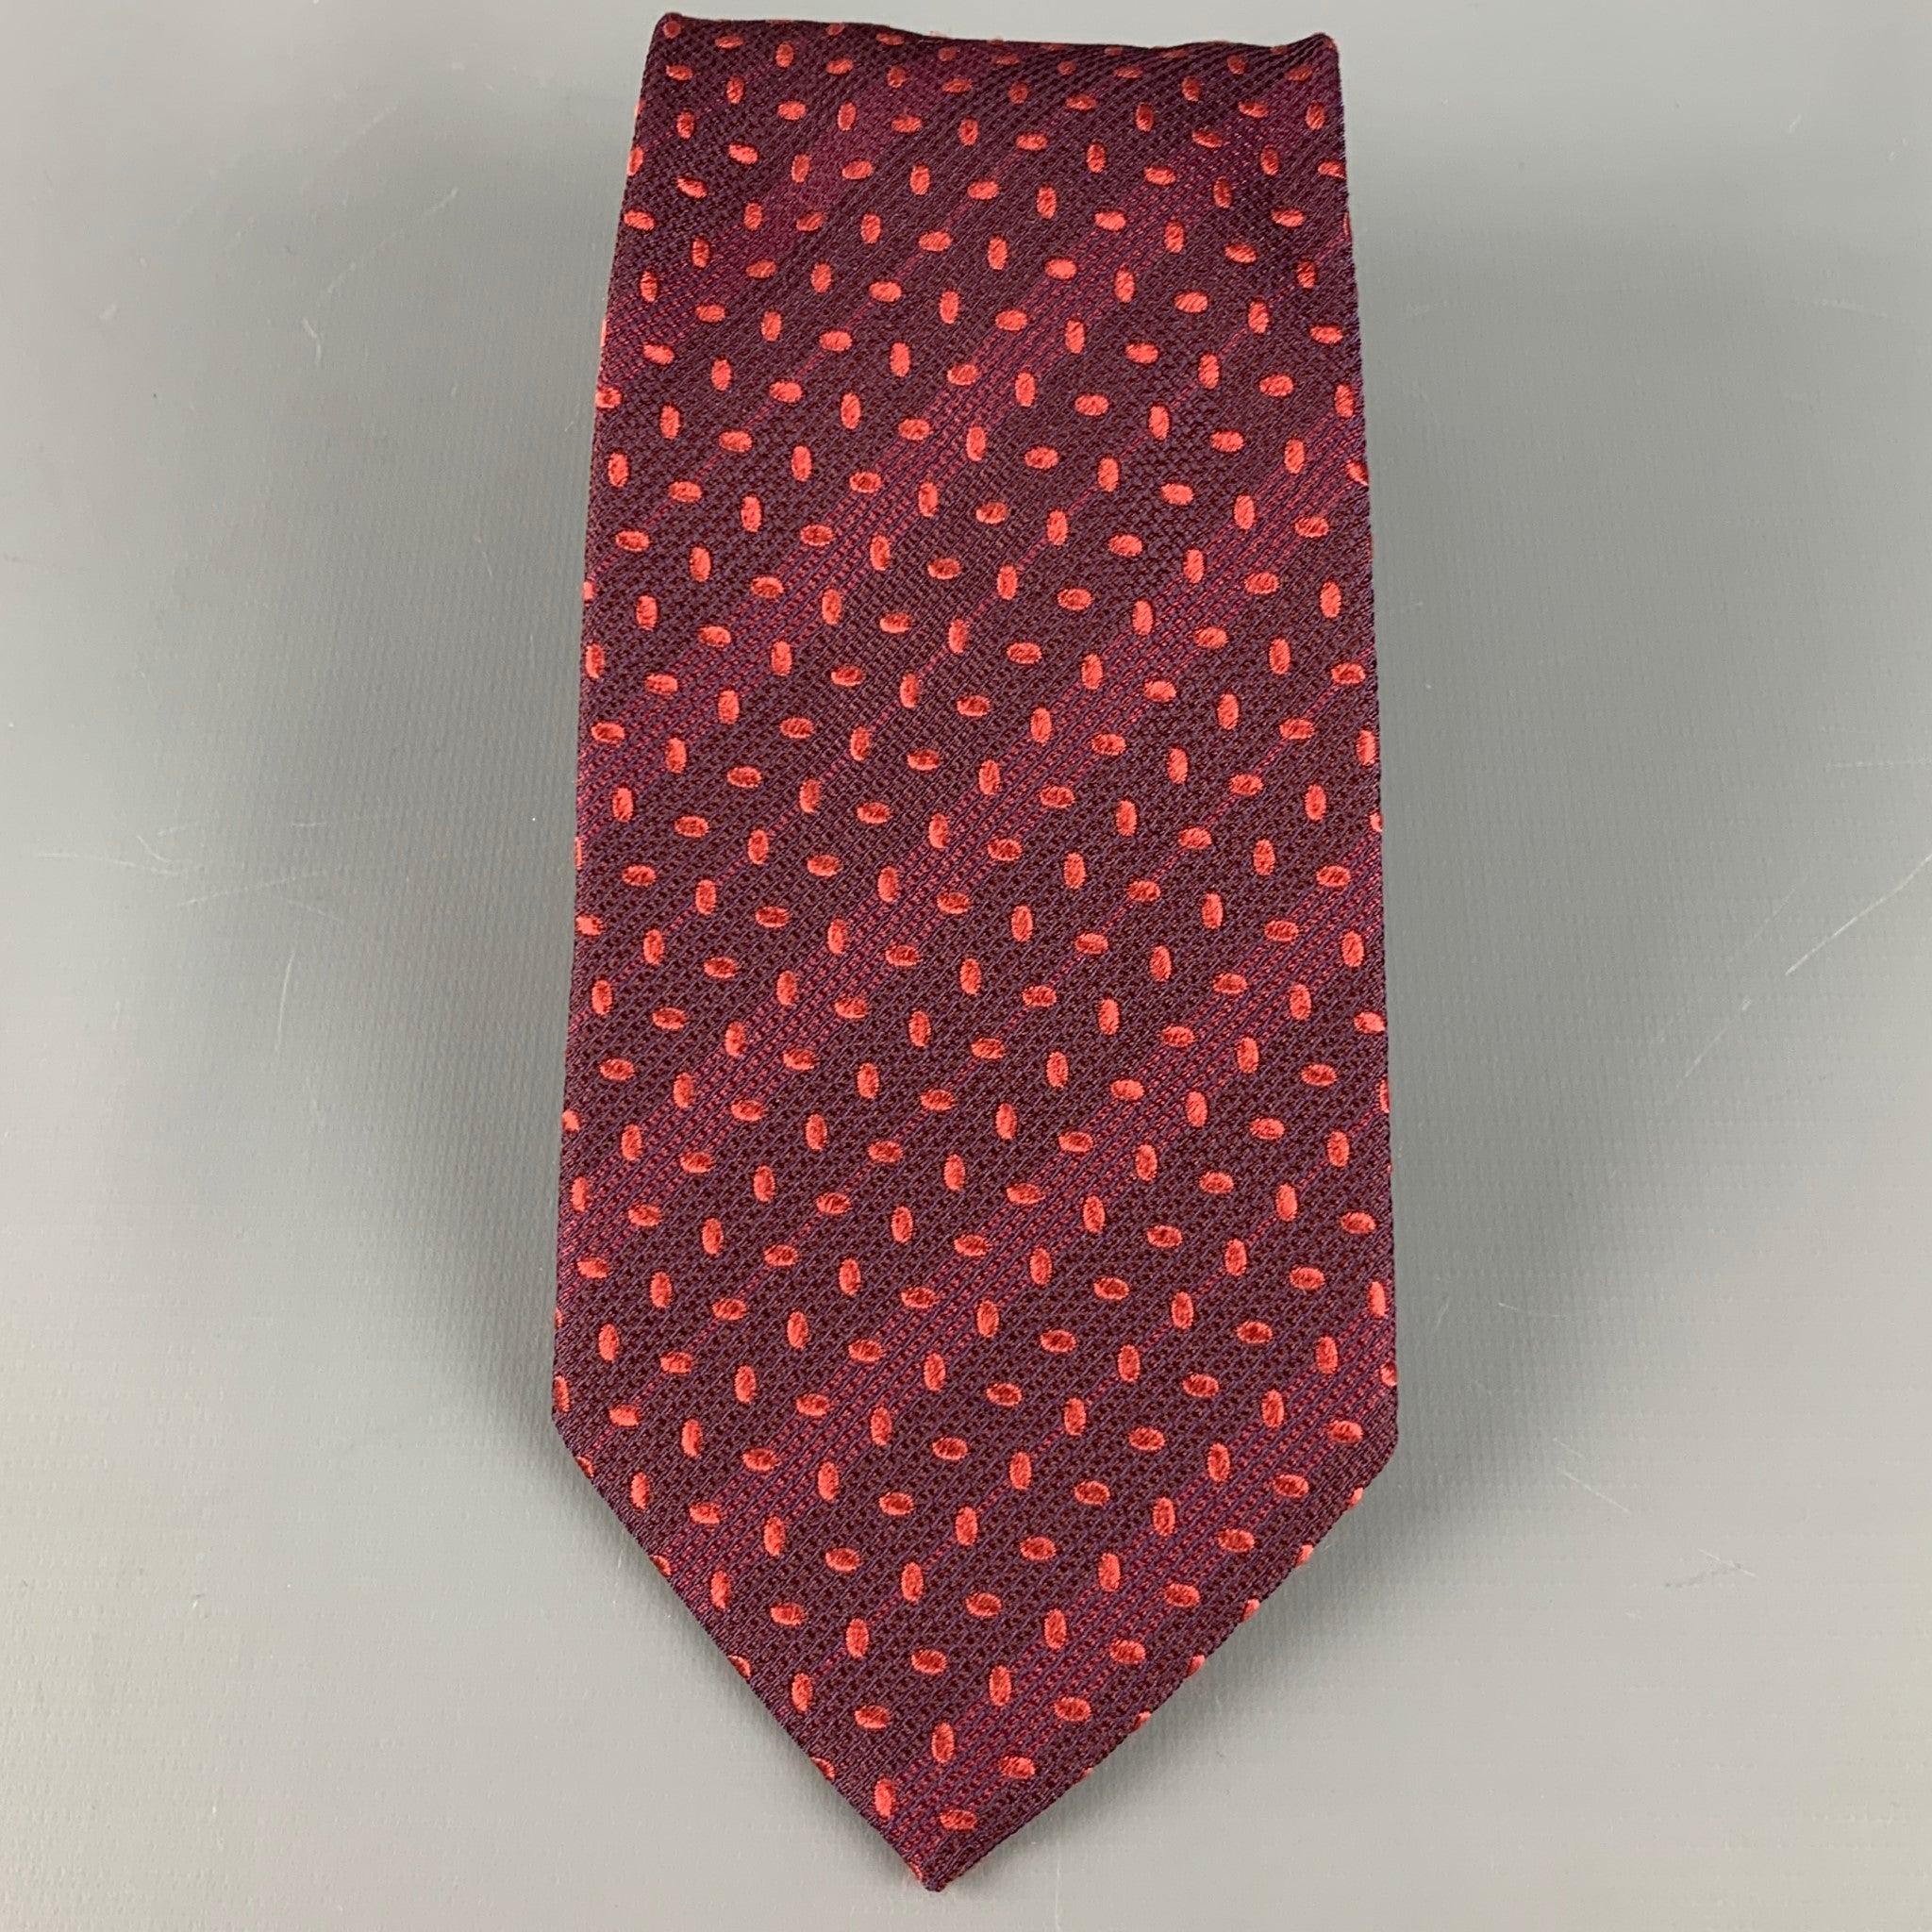 GIORGIO ARMANI
tie in burgundy silk, featuring a red dots pattern on a subtle diagonal stripe background. Made in Italy.Very Good Pre-Owned Condition. 

Measurements: 
  Width: 3.75 inches Length: 59 inches 
  
  
 
Reference: 126585
Category: